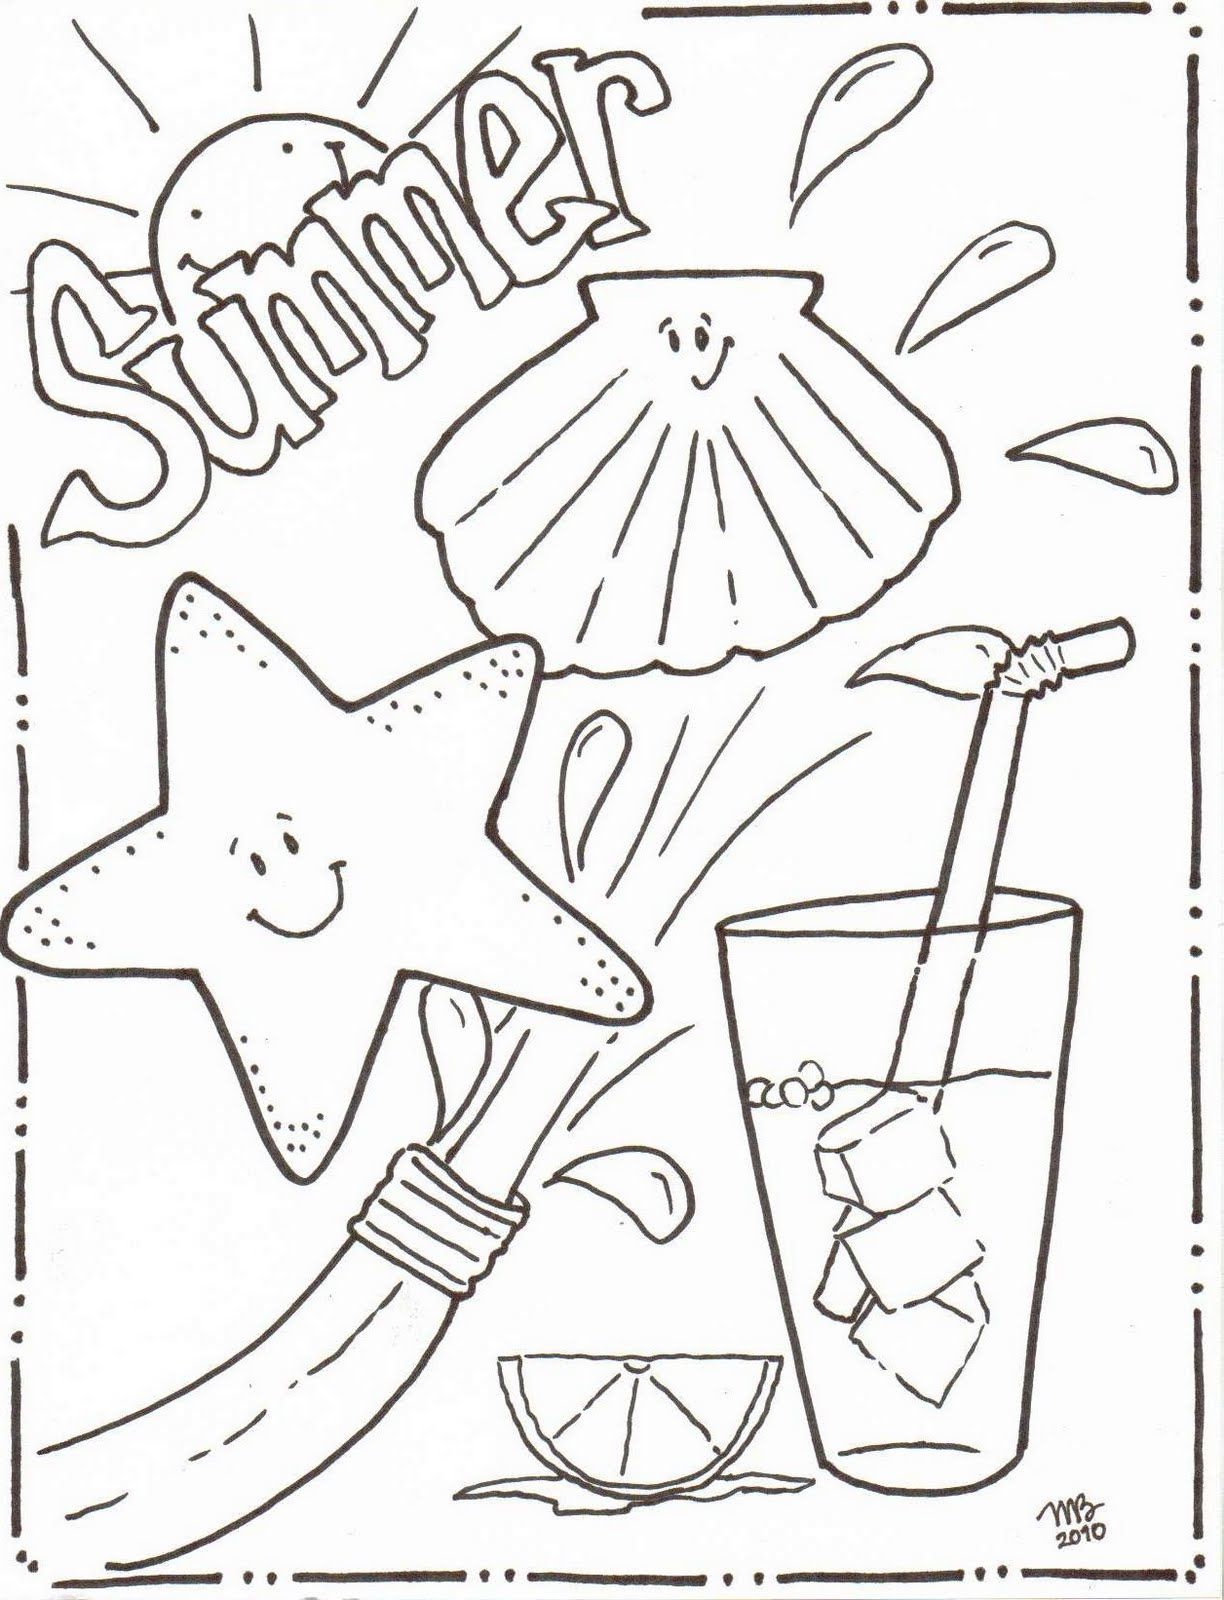 Summer coloring pages.